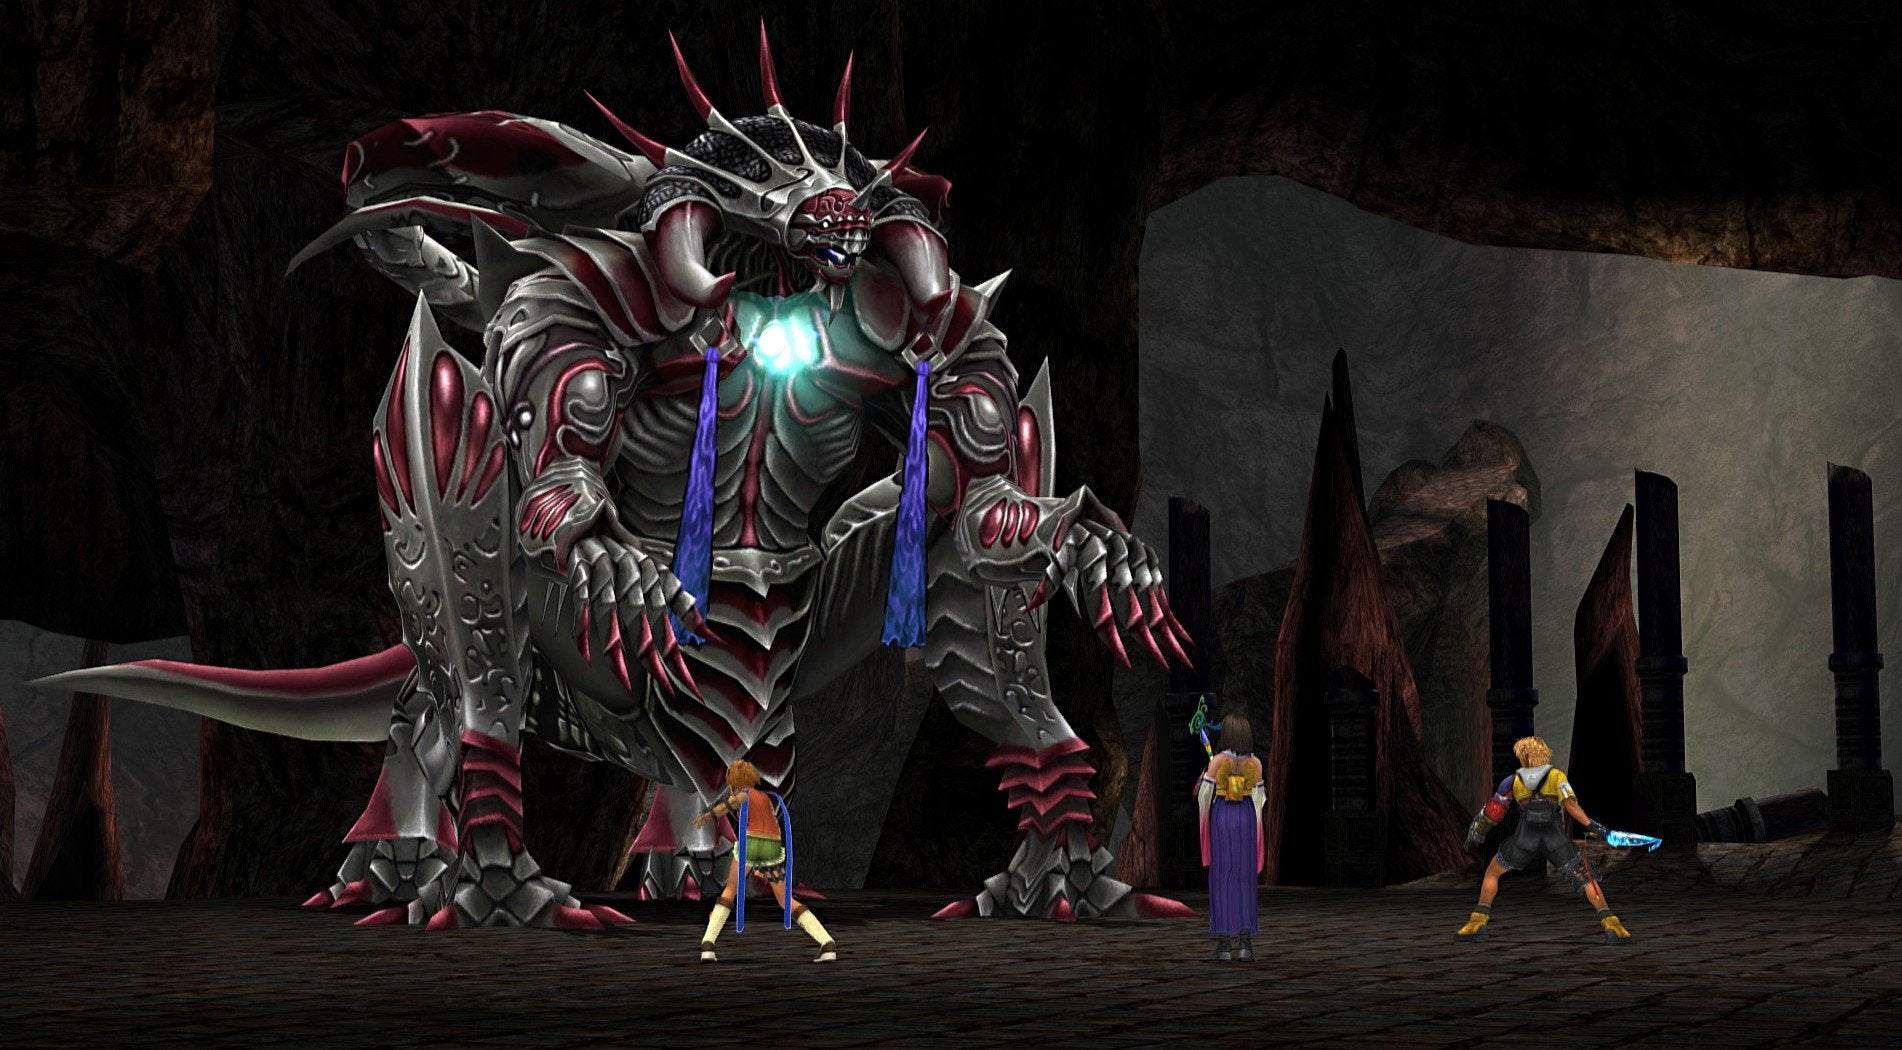 Ultima Weapon, a superboss found in Final Fantasy X.